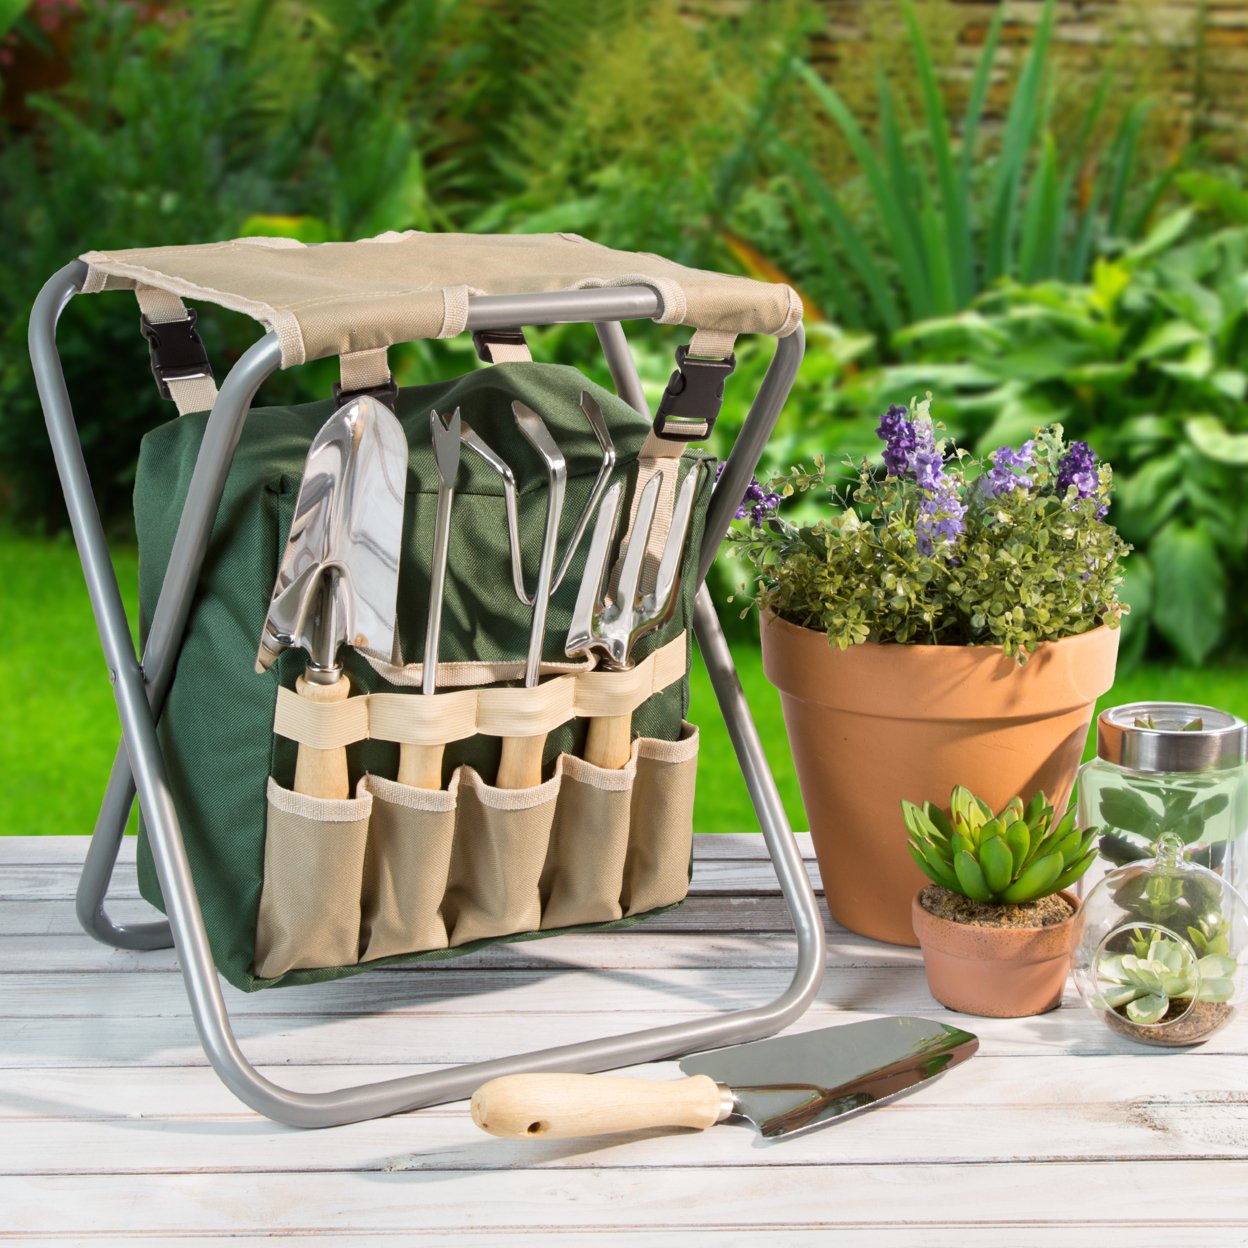 Pure Garden Folding Garden Stool With Tool Bag And 5 Tools Makes Yard Work And Gardening Easy On Your Knees